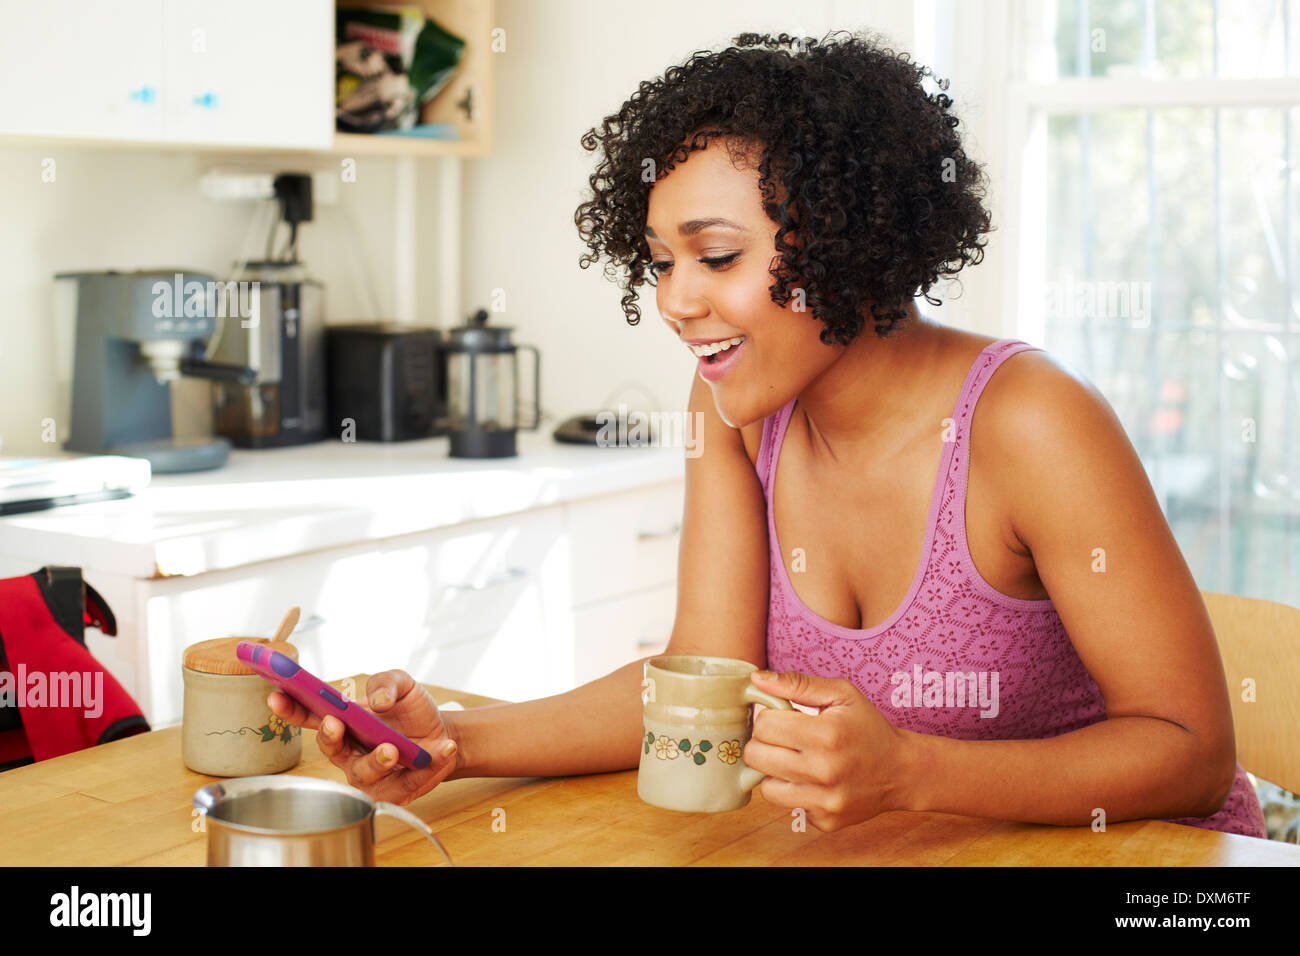 Mixed race woman using cell phone and drinking coffee in kitchen Stock Photo